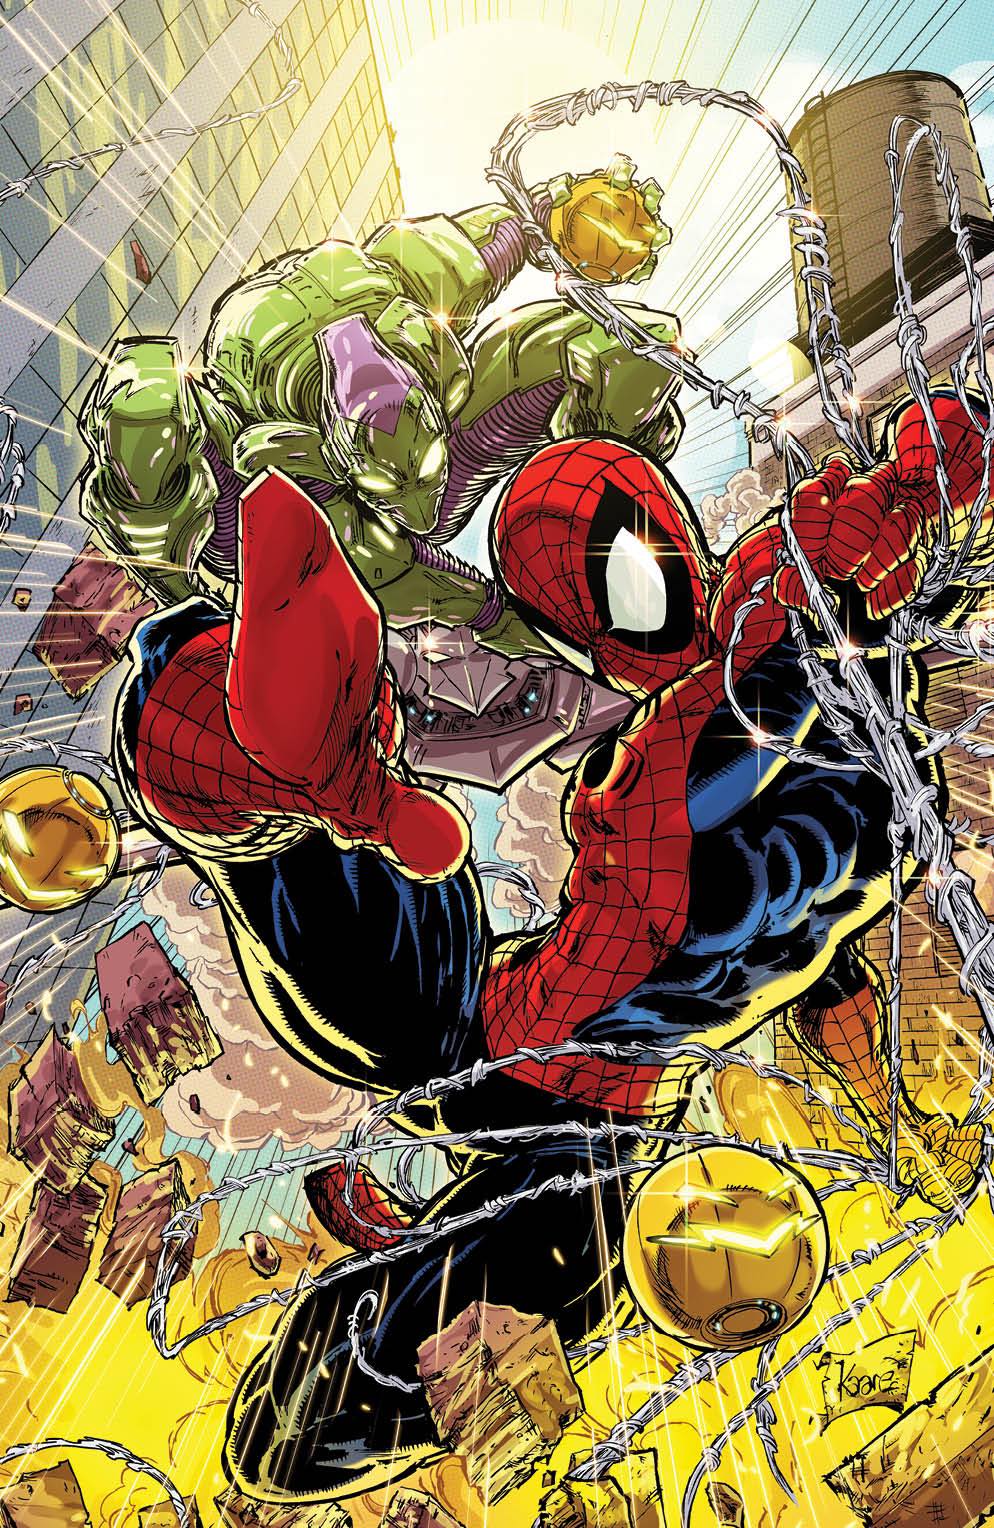 ULTIMATE SPIDER-MAN #1 WITH COVER ART BY KAARE ANDREWS